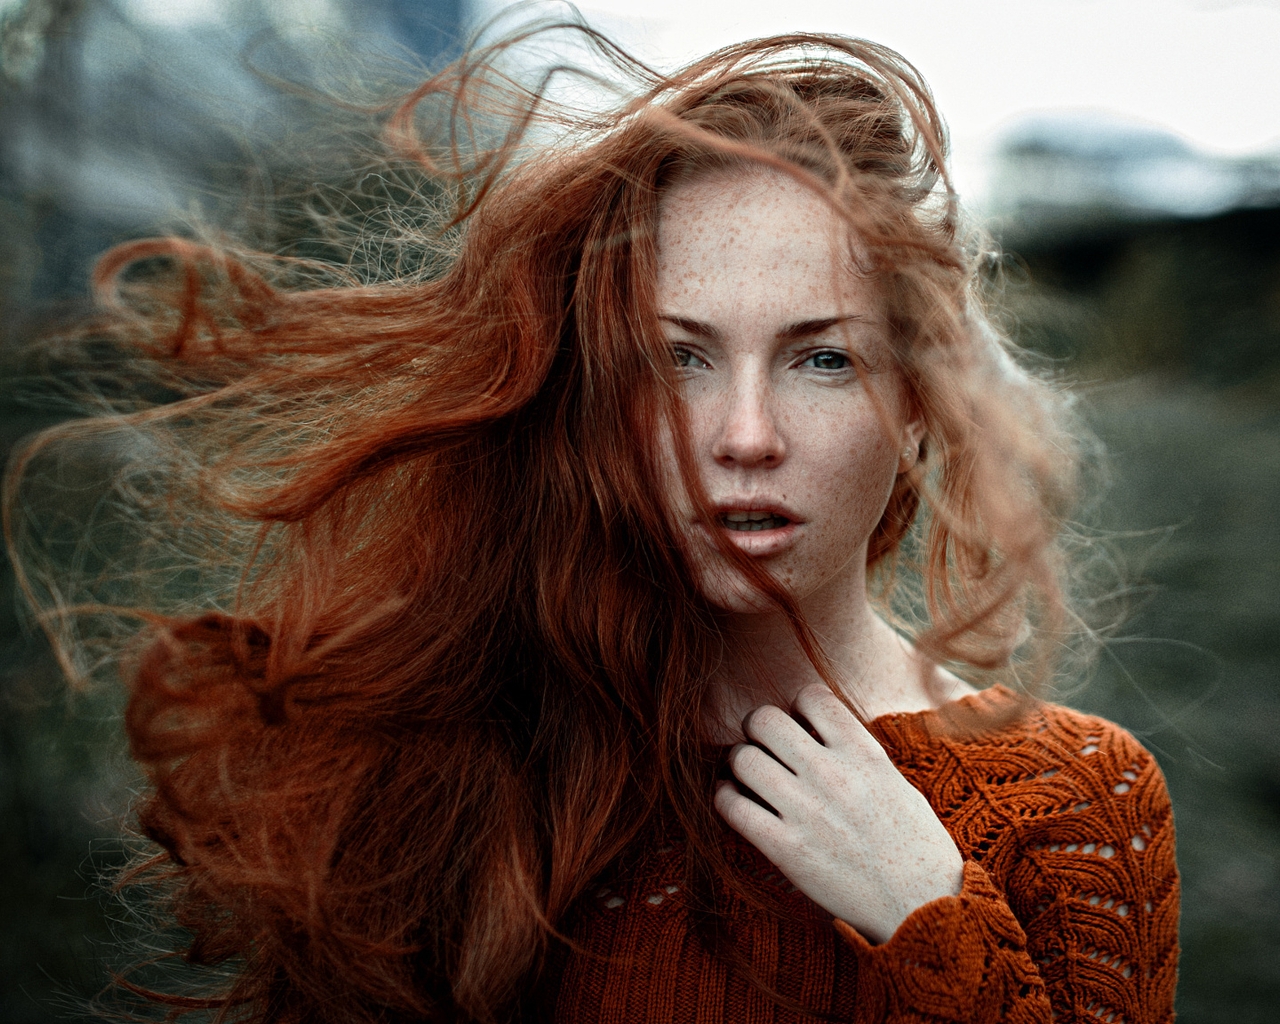 Image: Girl, face, redhead, freckles, wind, hair, look, jacket